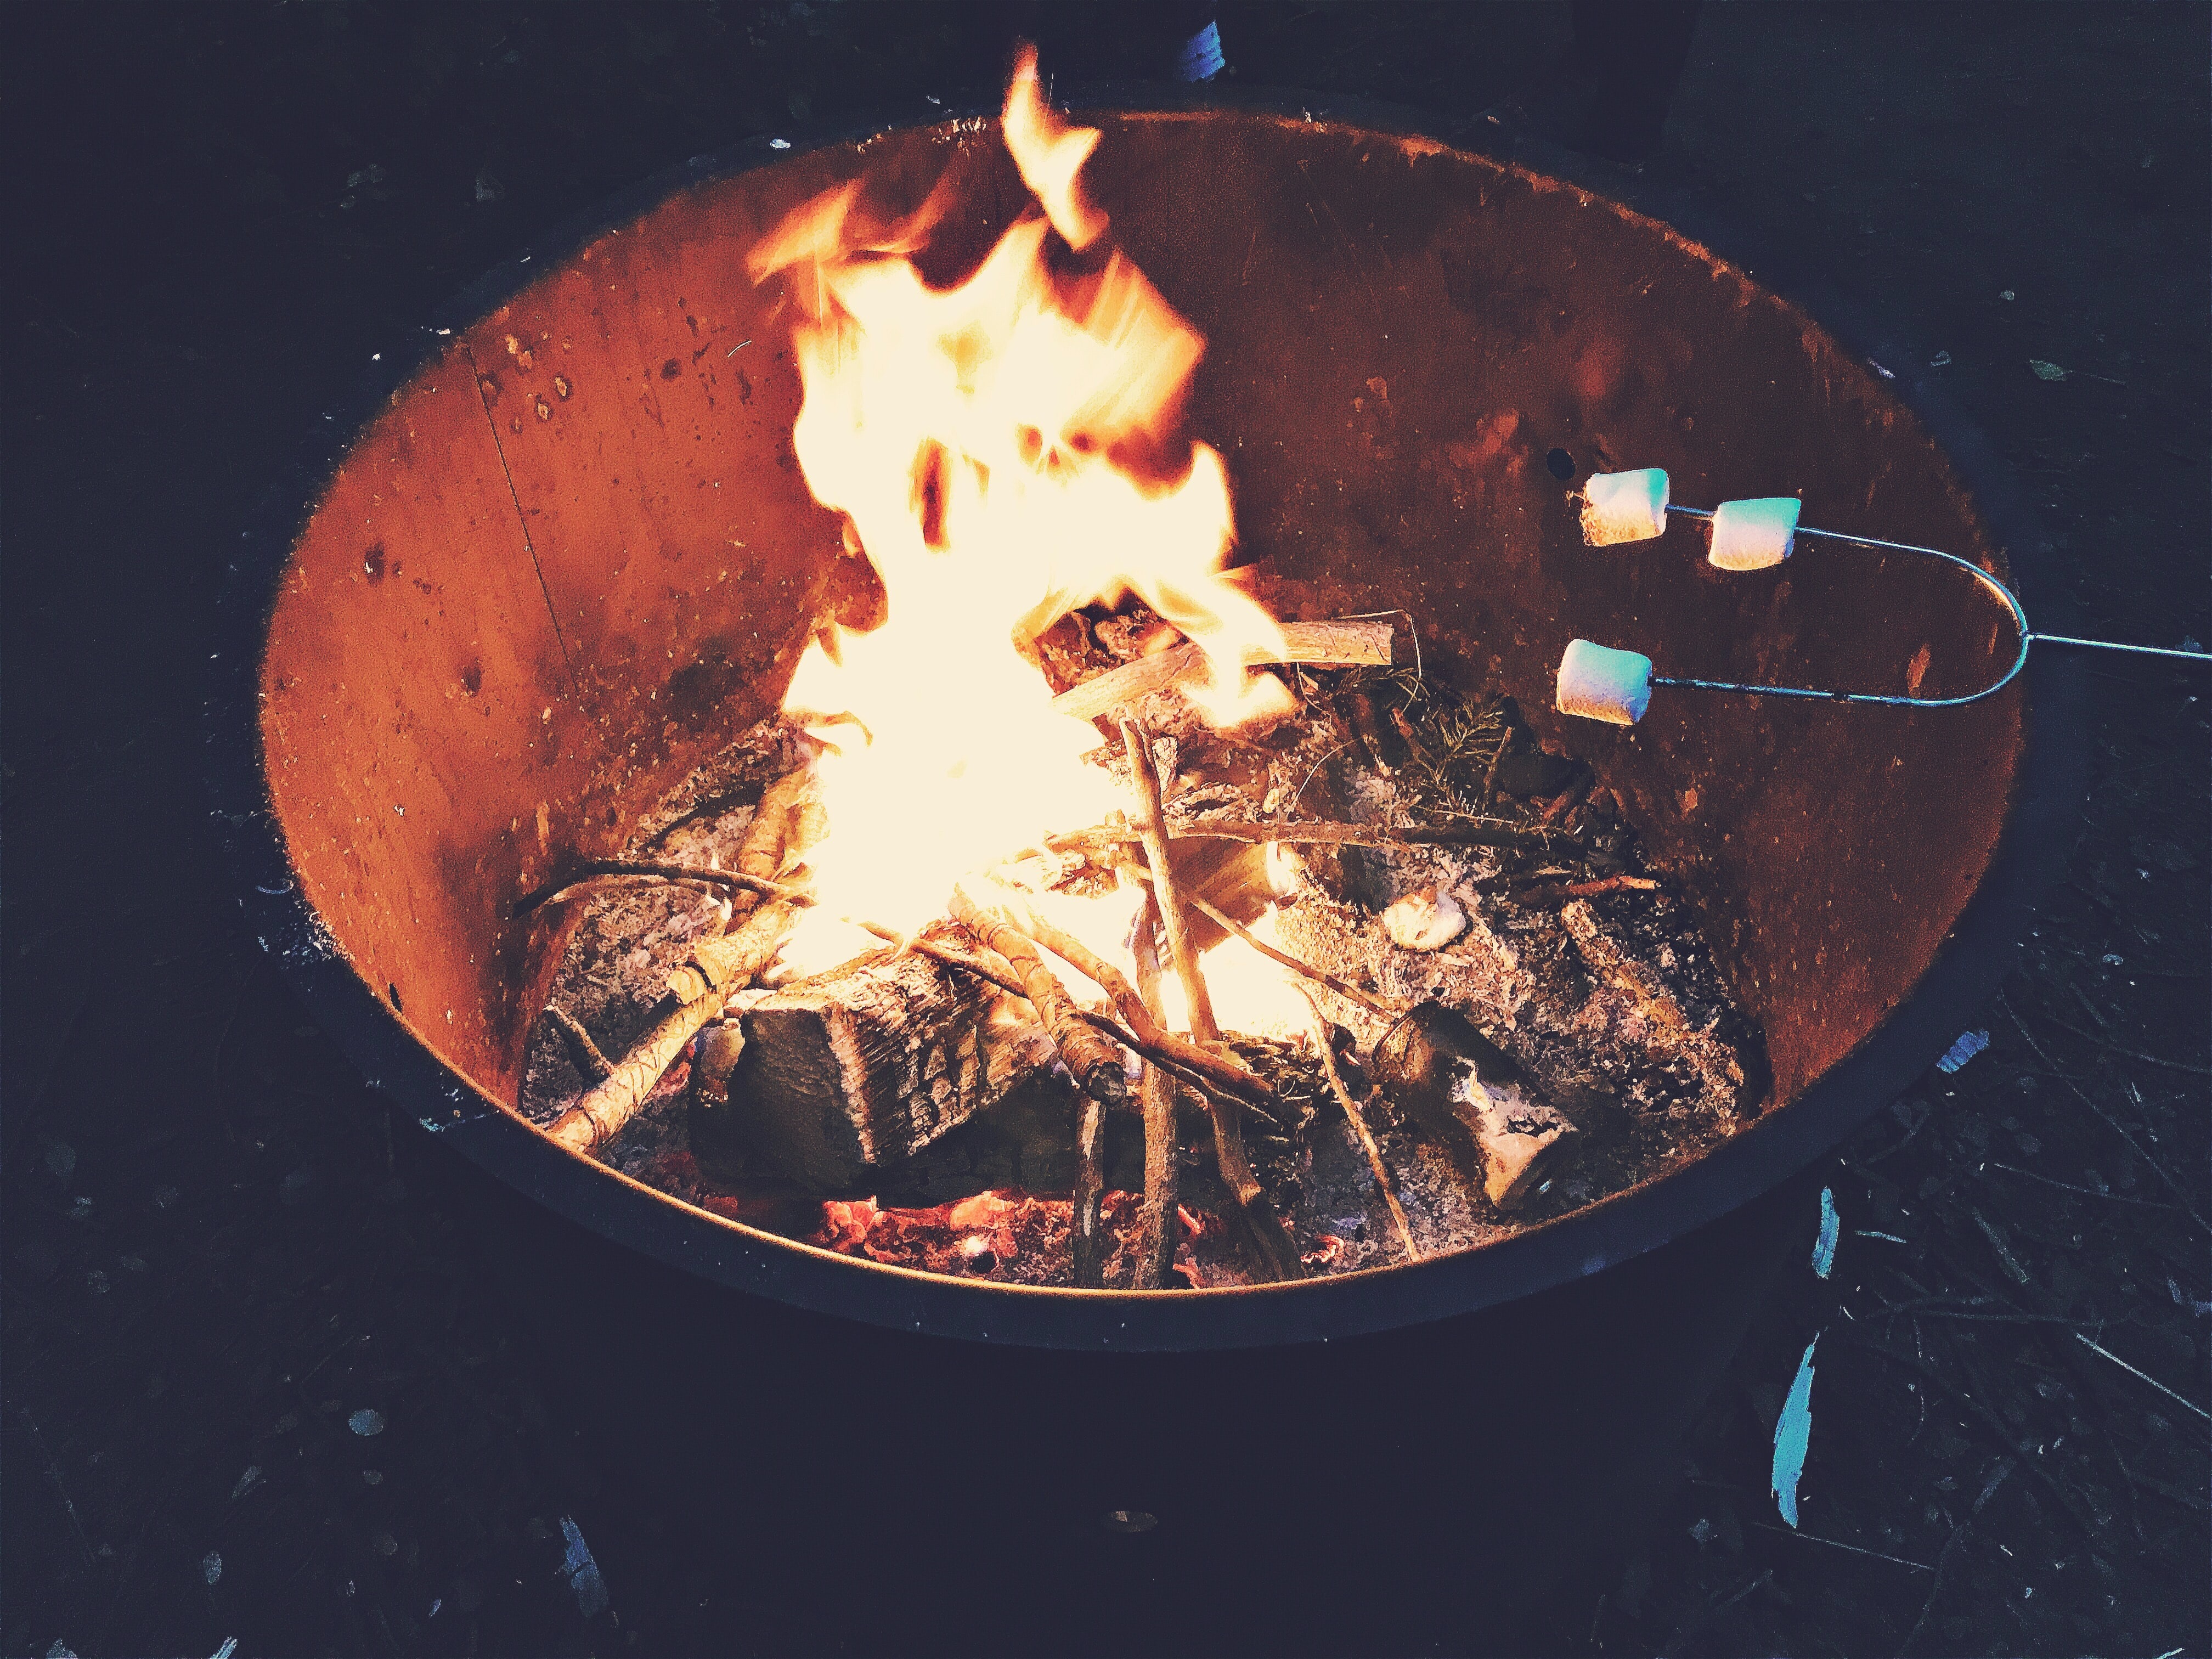 Roast marshmallows on an open flame in your own backyard, the safe way!